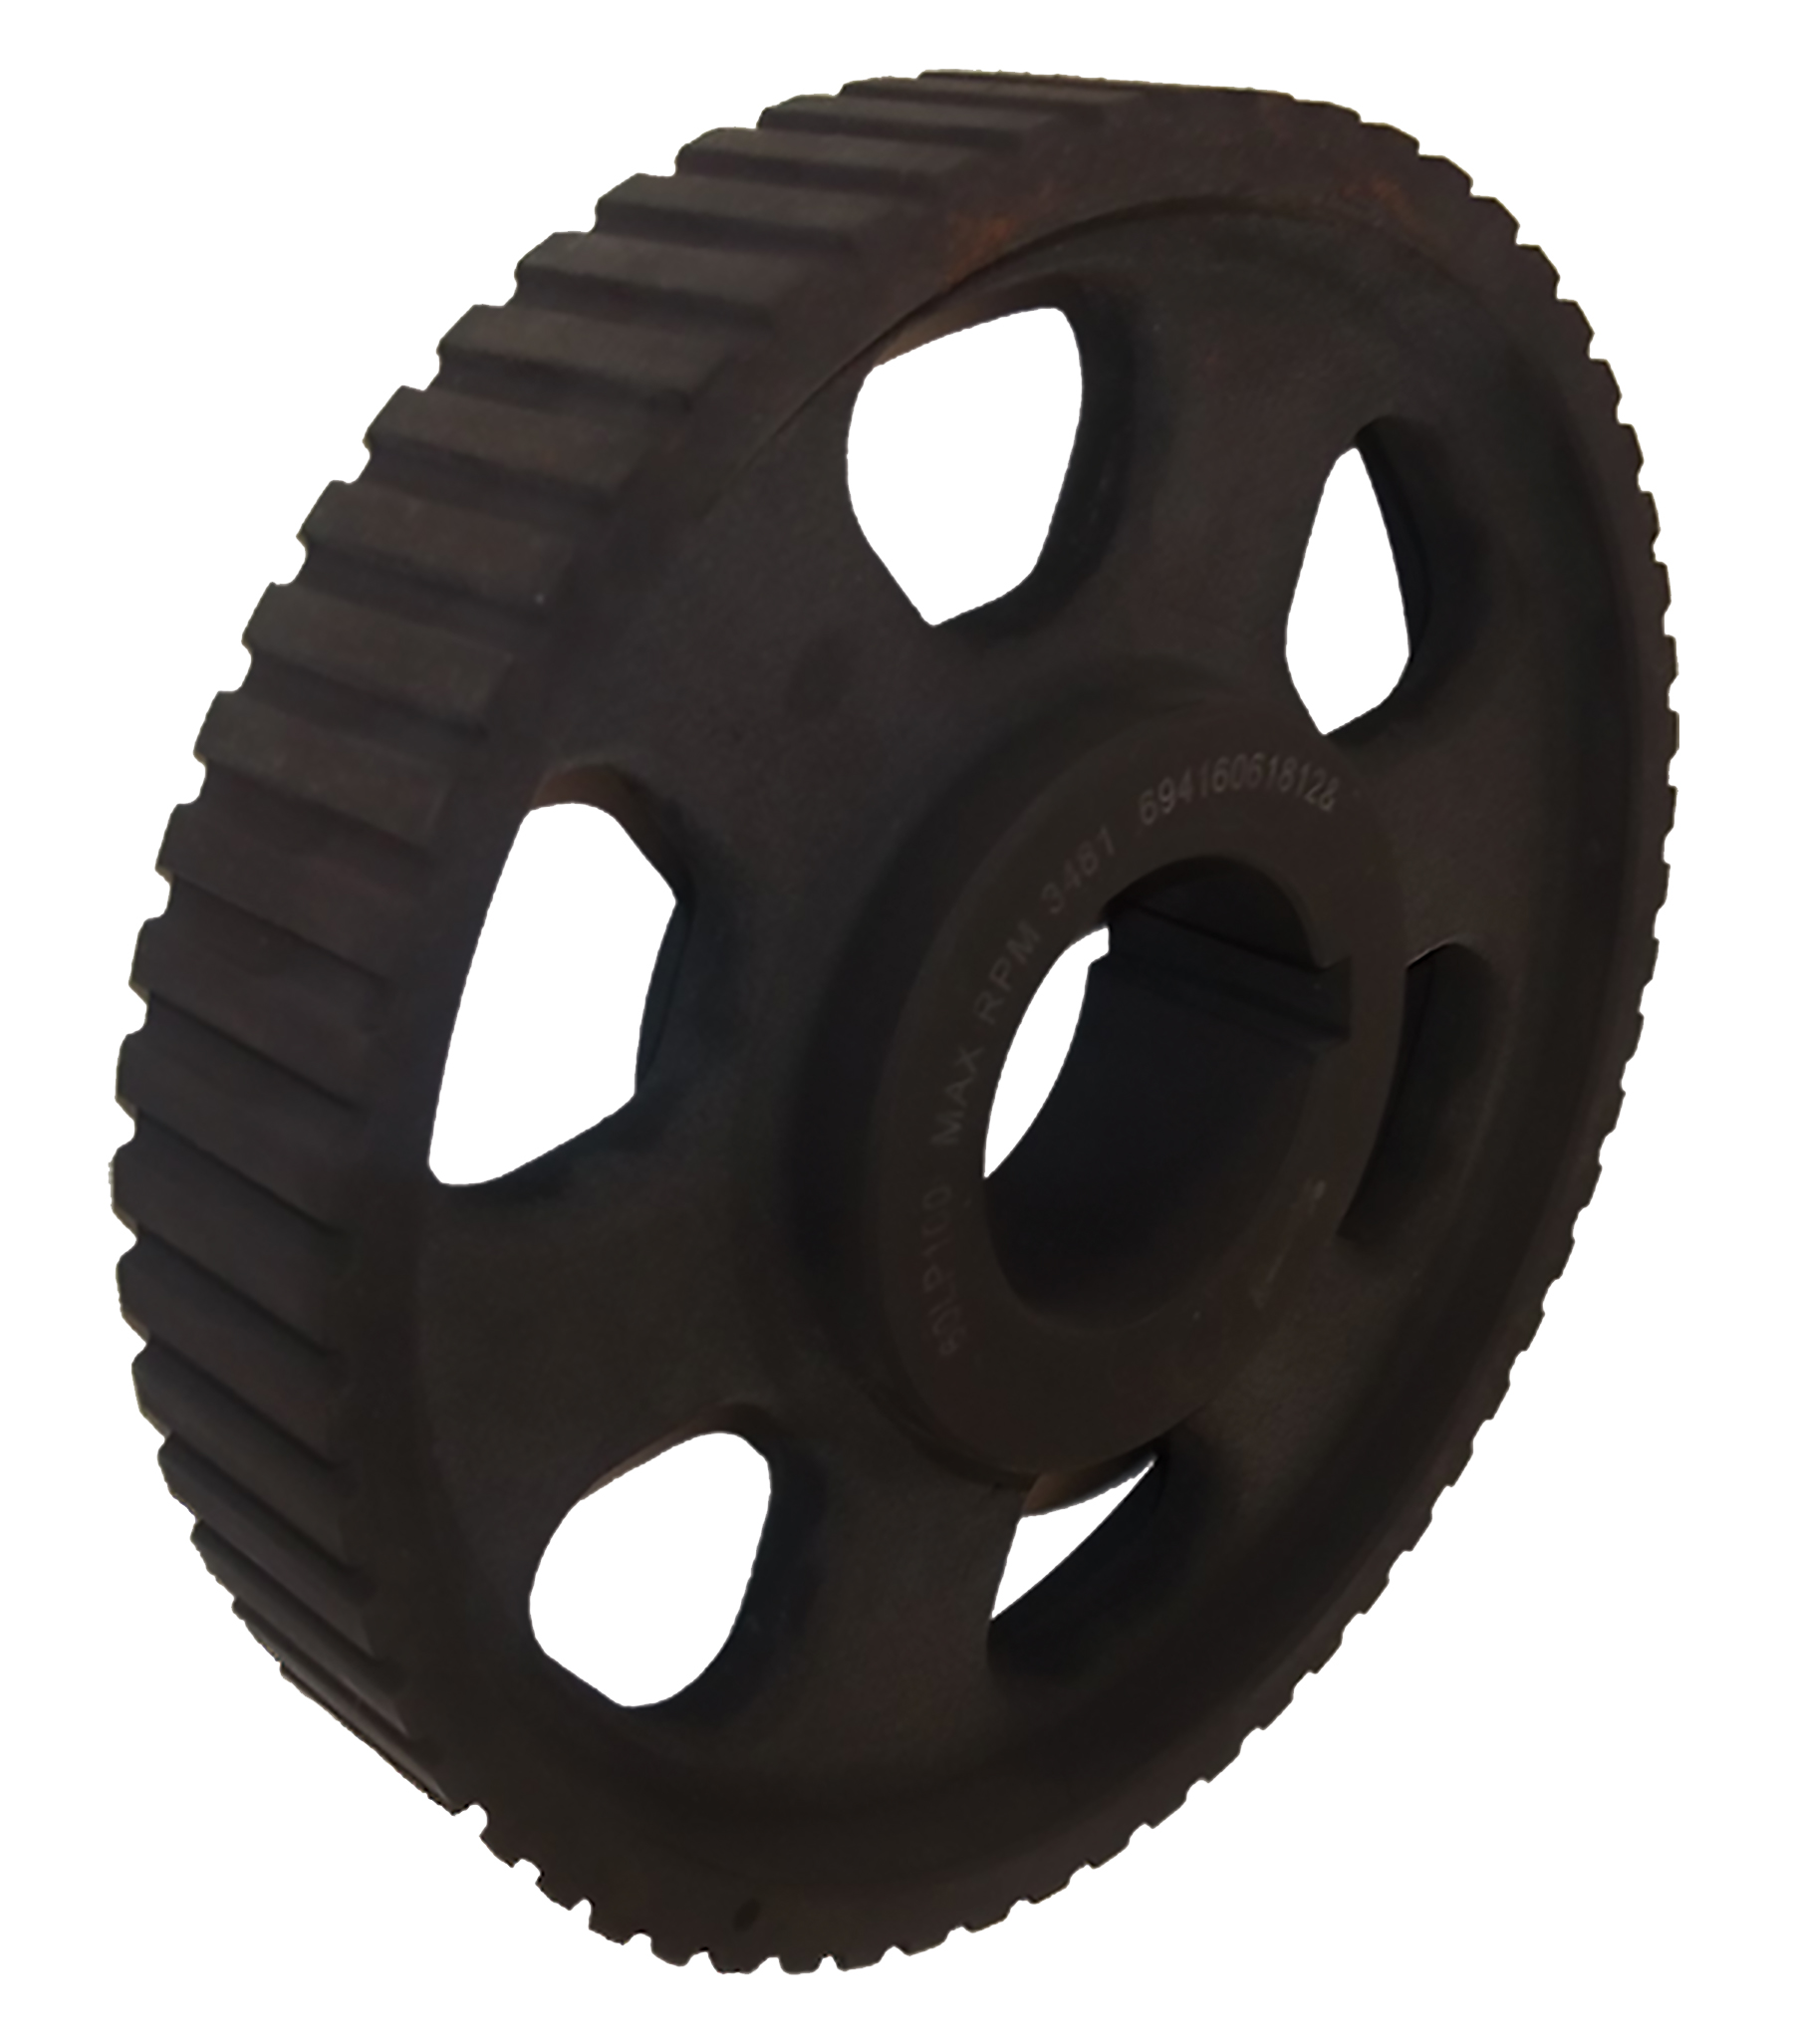 120LP100 - Cast Iron Imperial Pitch Pulleys